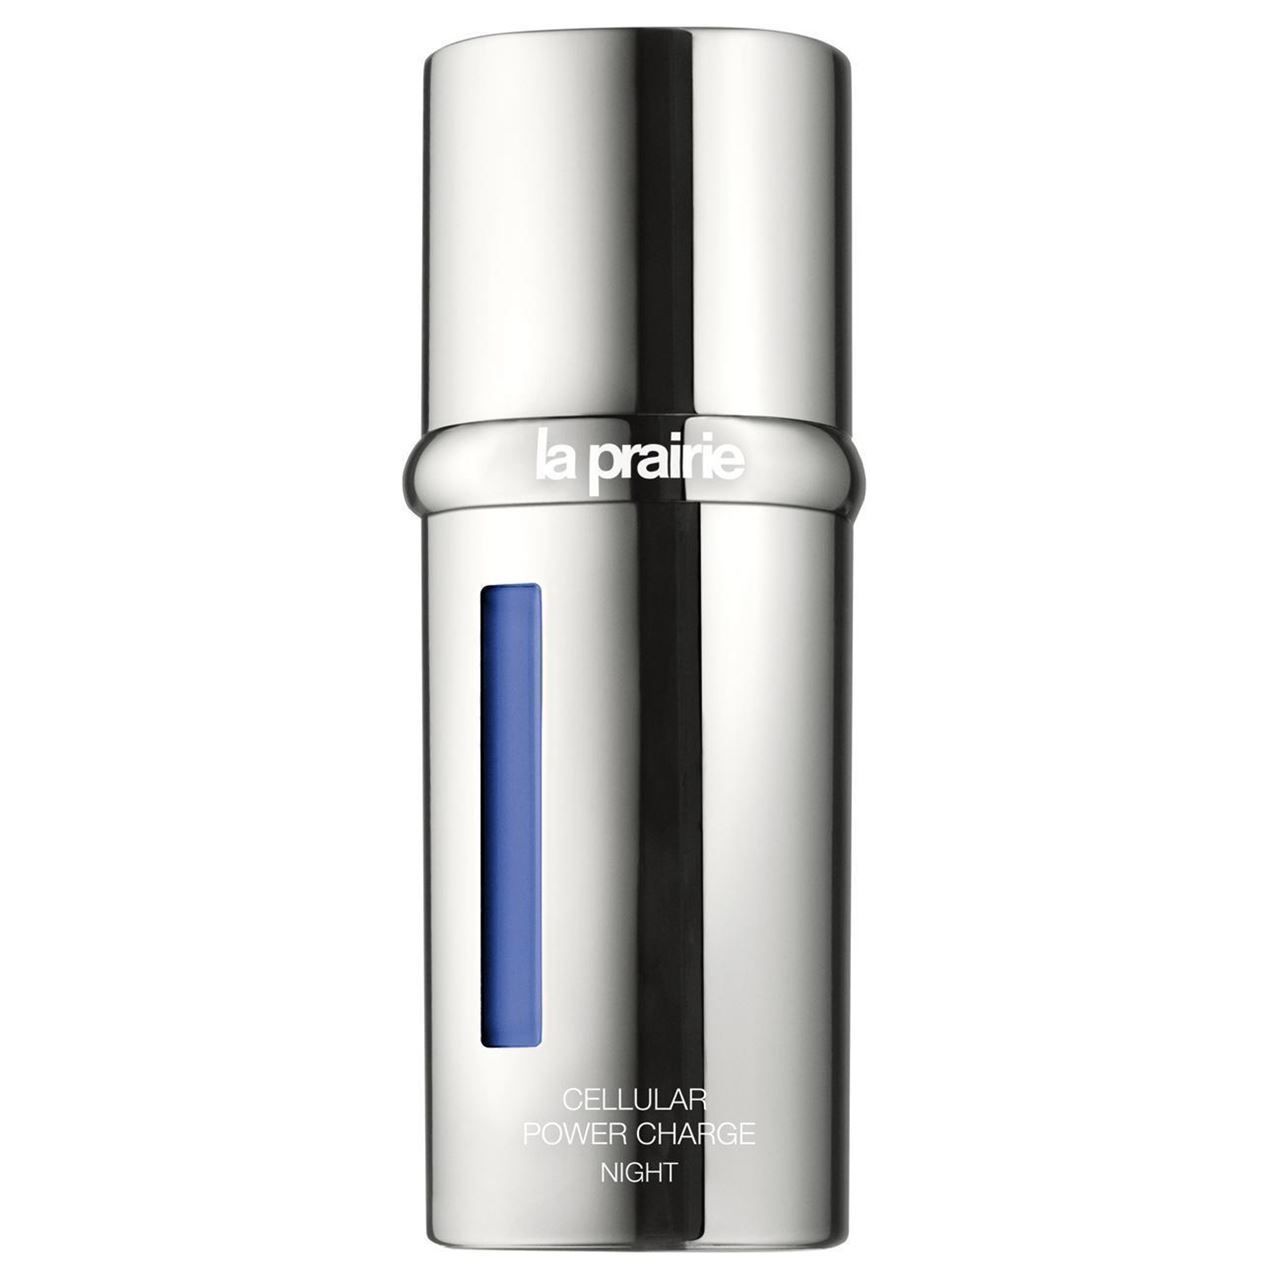 la prairie cellular power charge night review